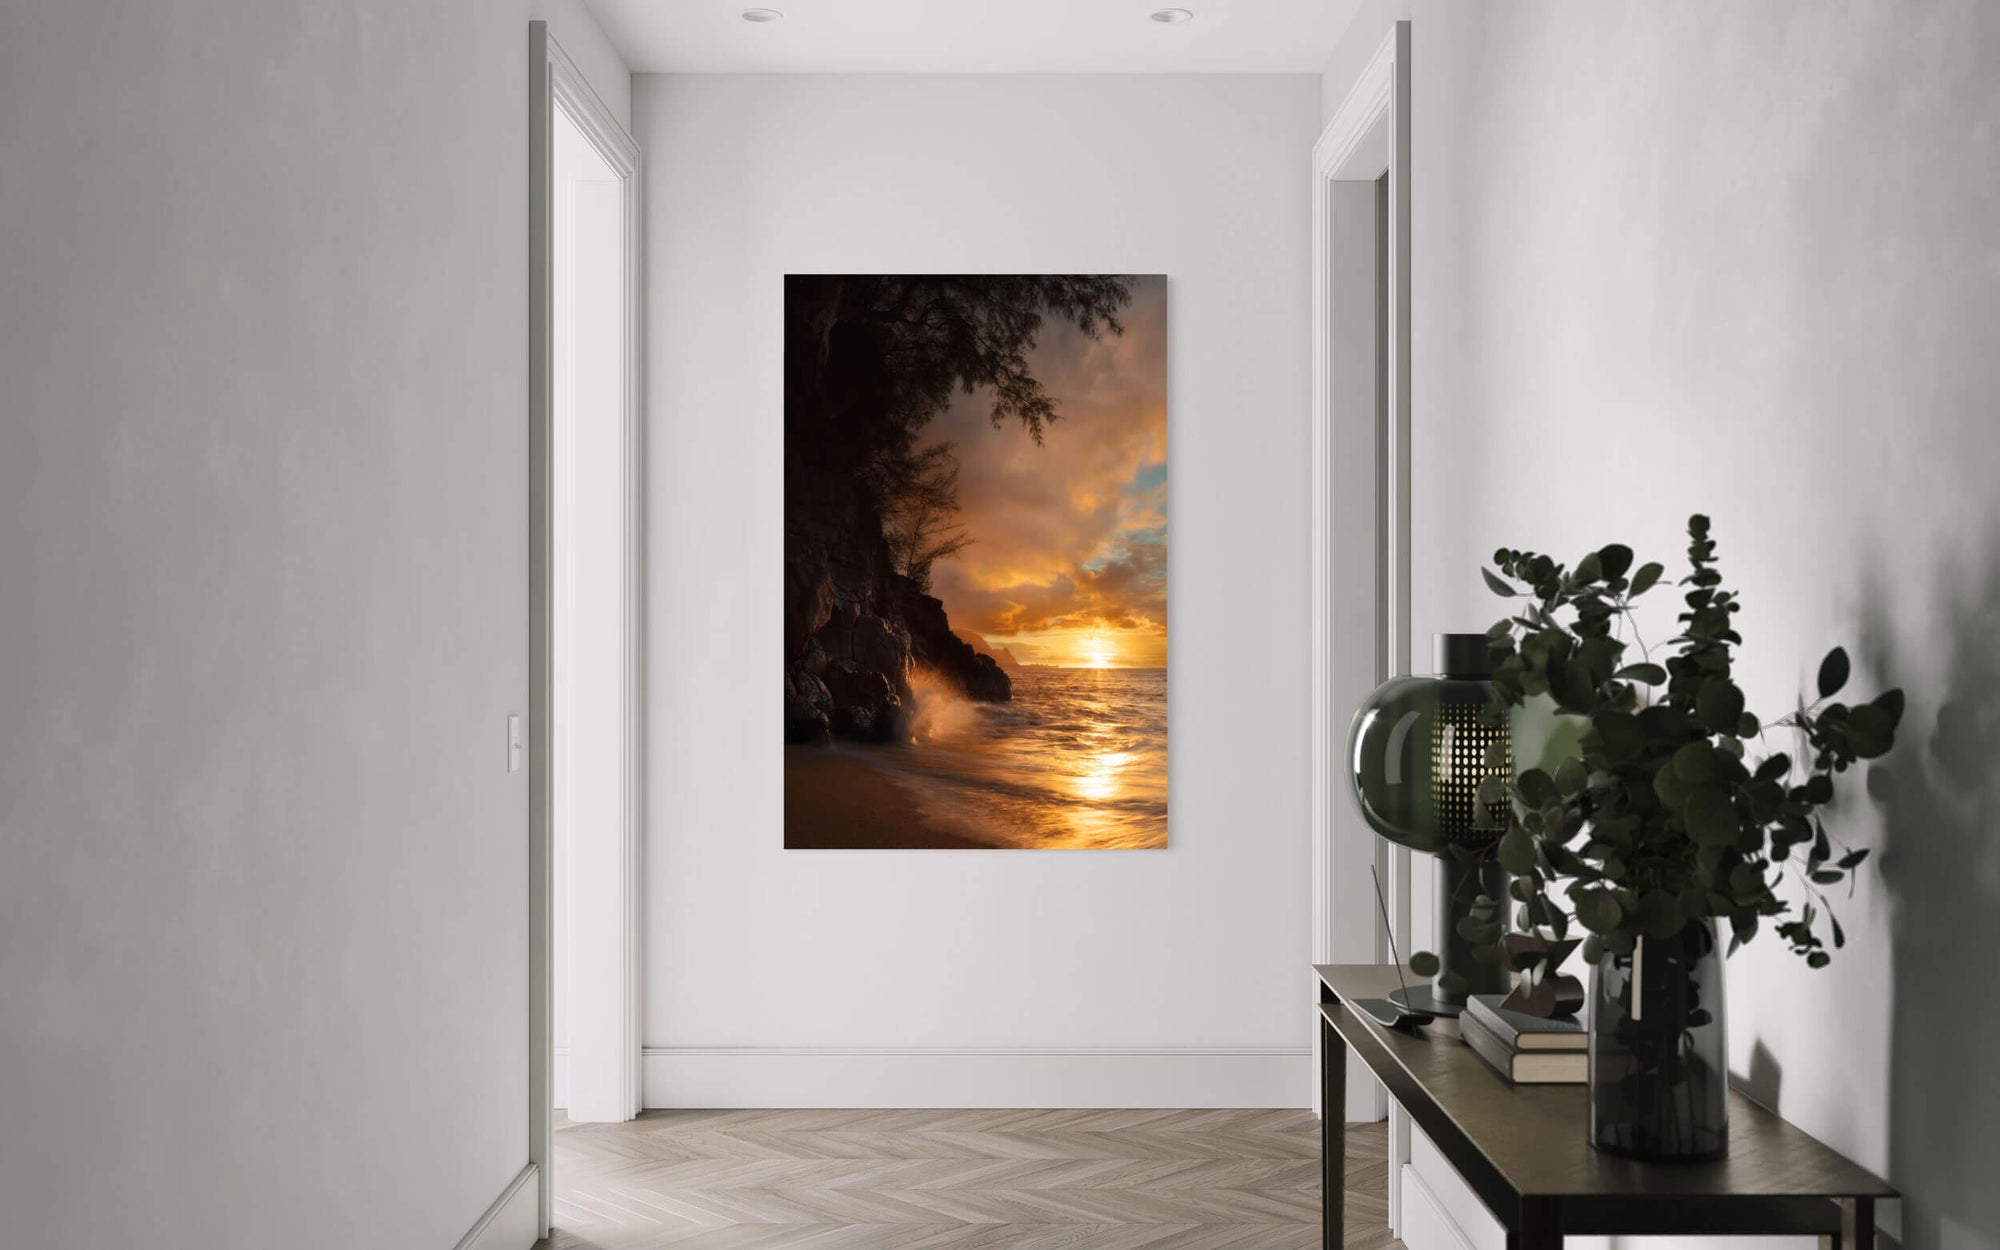 A piece of Kauai art showing a sunset picture from Hideaway Beach hangs in a hallway.